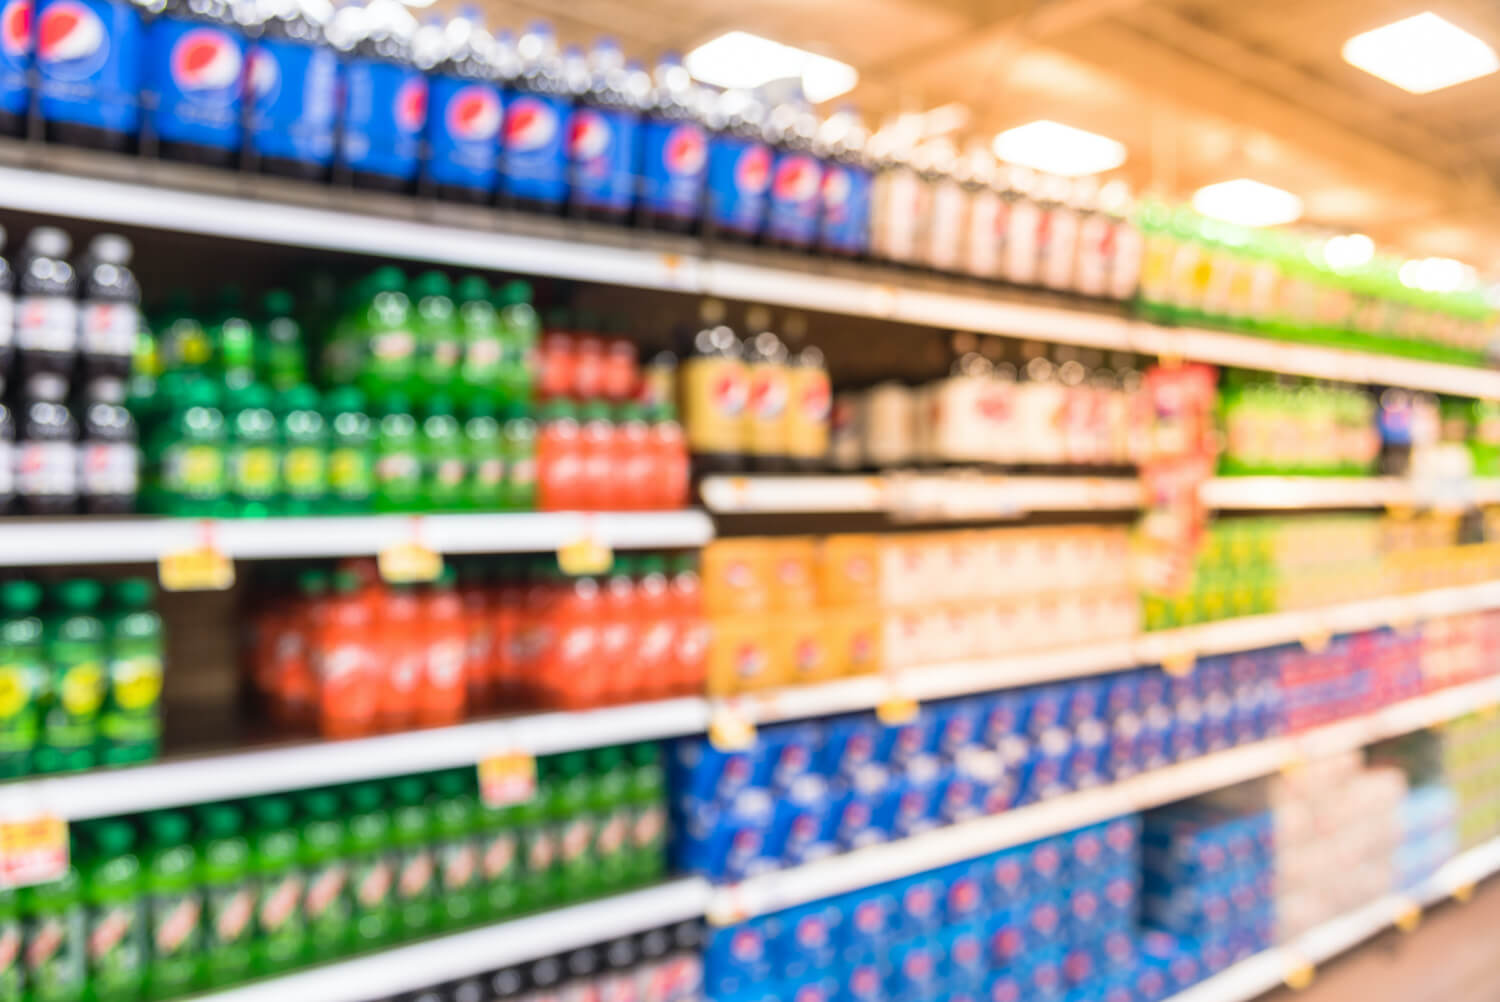 A blurred image showing a row of sugary drinks in a grocery store. October 2021